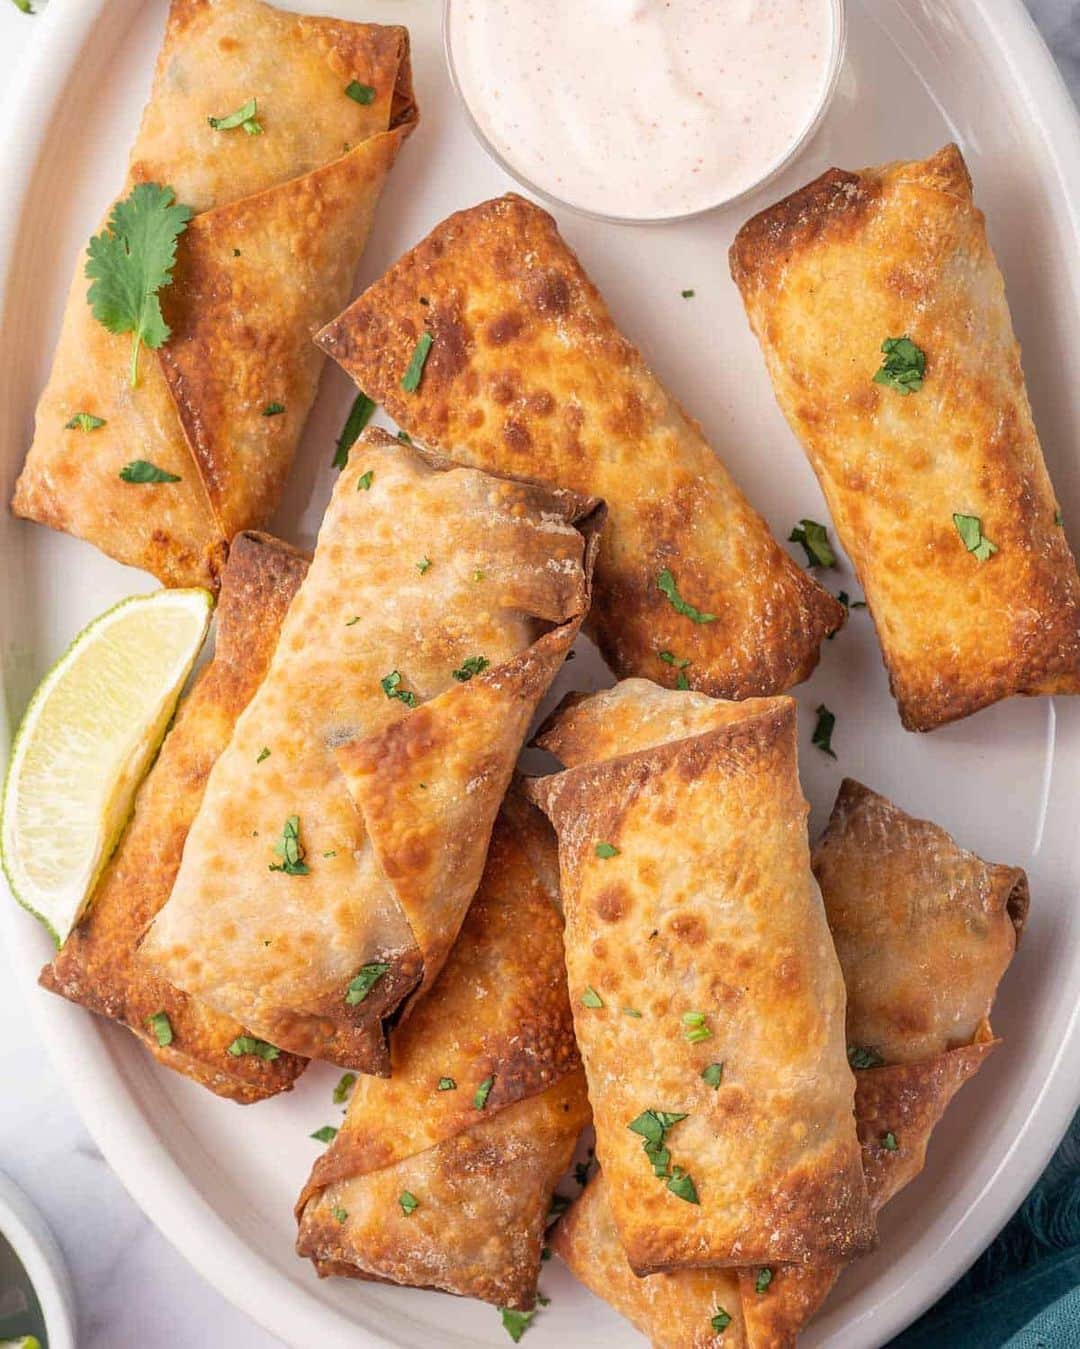 Easy Recipesのインスタグラム：「Crispy air fryer southwest egg rolls are loaded with chicken, corn, black beans and a zesty Tex Mex seasoning blend. The homemade egg roll recipe is then air fried until it’s crispy and delicious, with no excess oil needed. They are healthier, easier to clean up and taste incredible.  Full recipe link in my bio @cookinwithmima  https://www.cookinwithmima.com/air-fryer-southwest-egg-rolls/」